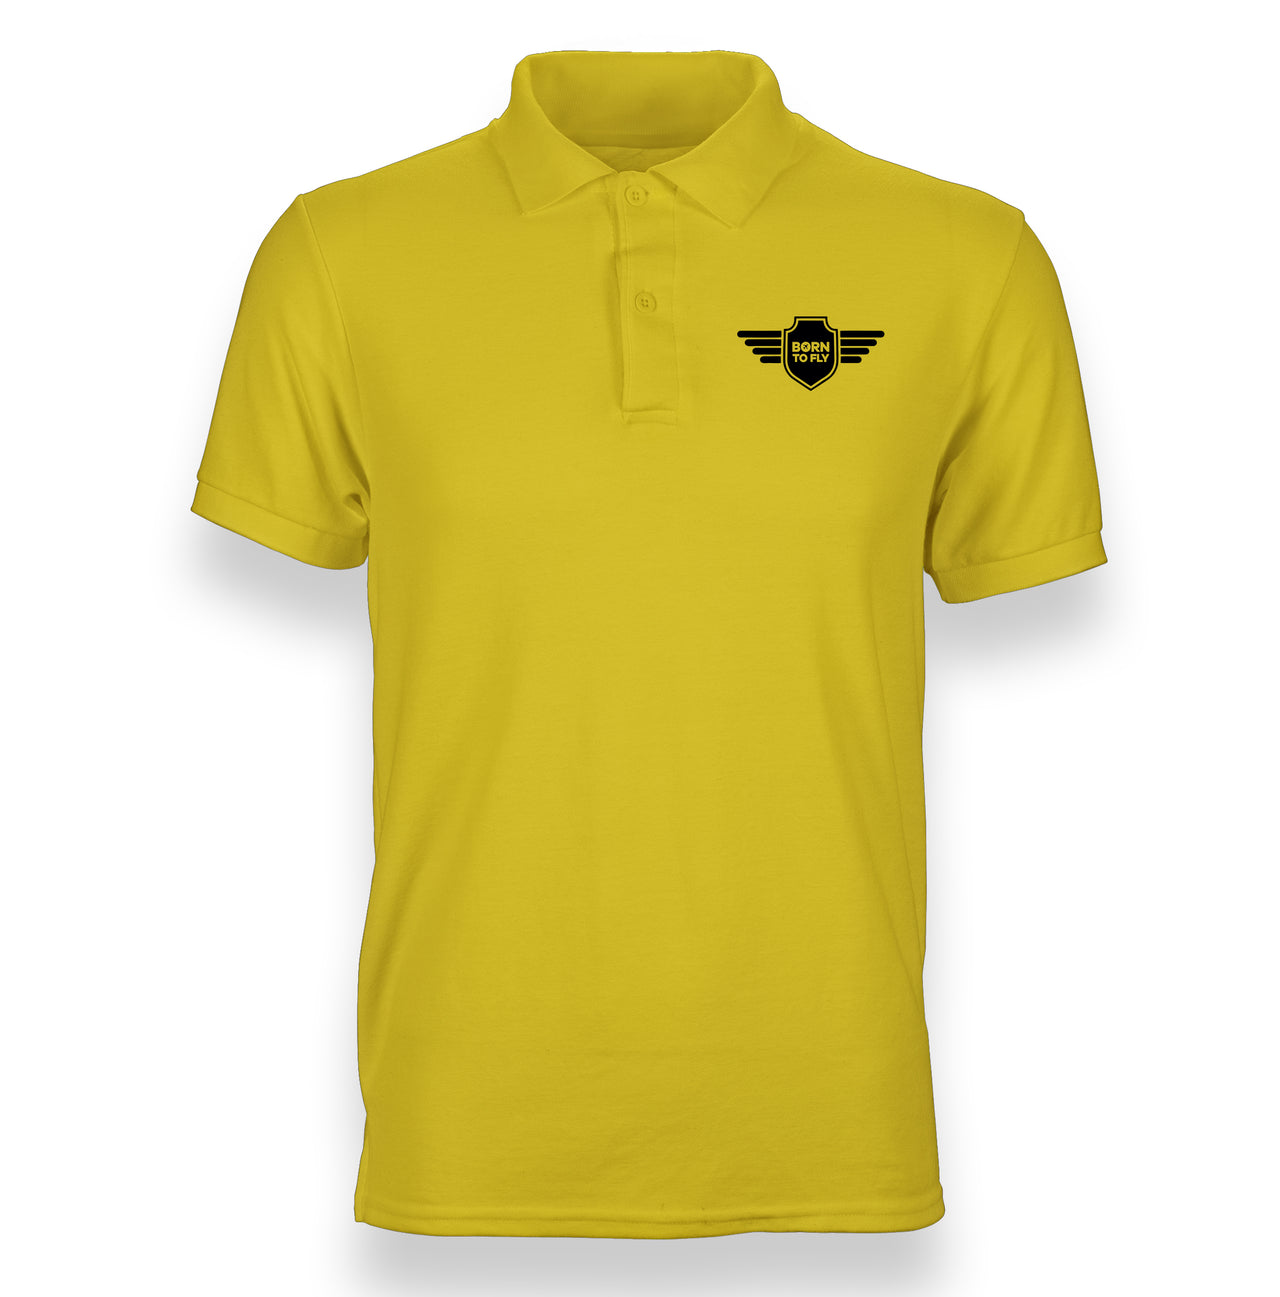 Born To Fly & Badge Designed "WOMEN" Polo T-Shirts